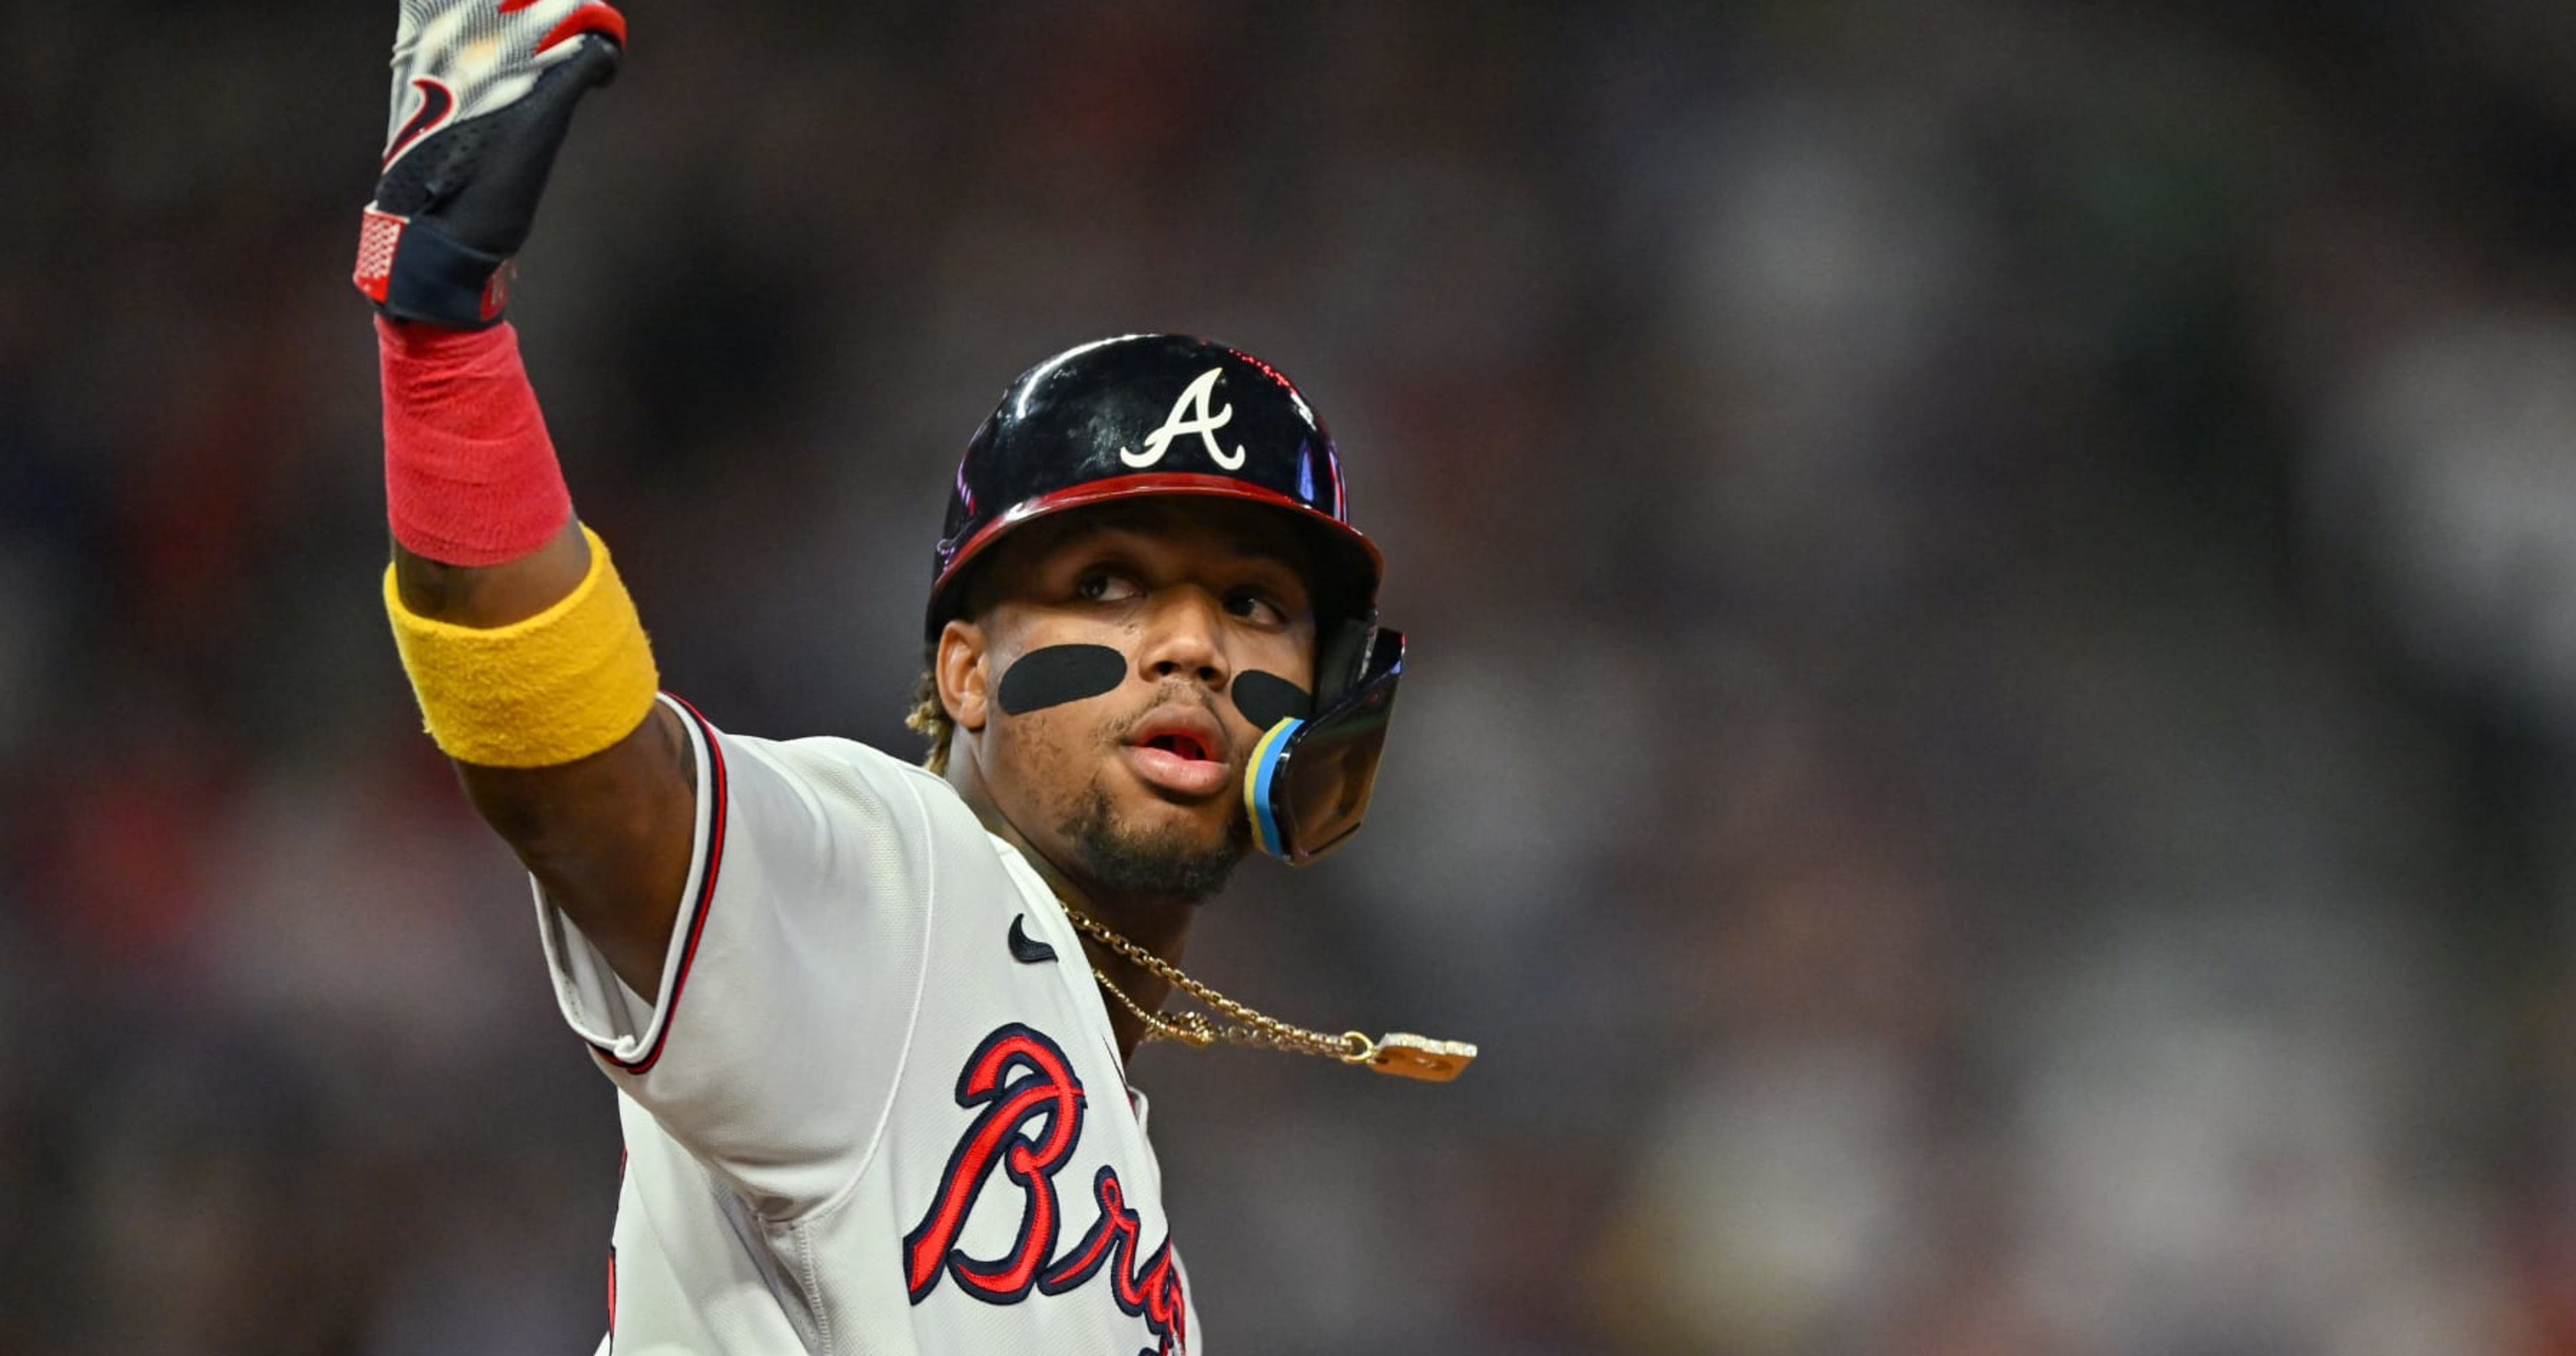 Best Braves players by uniform number